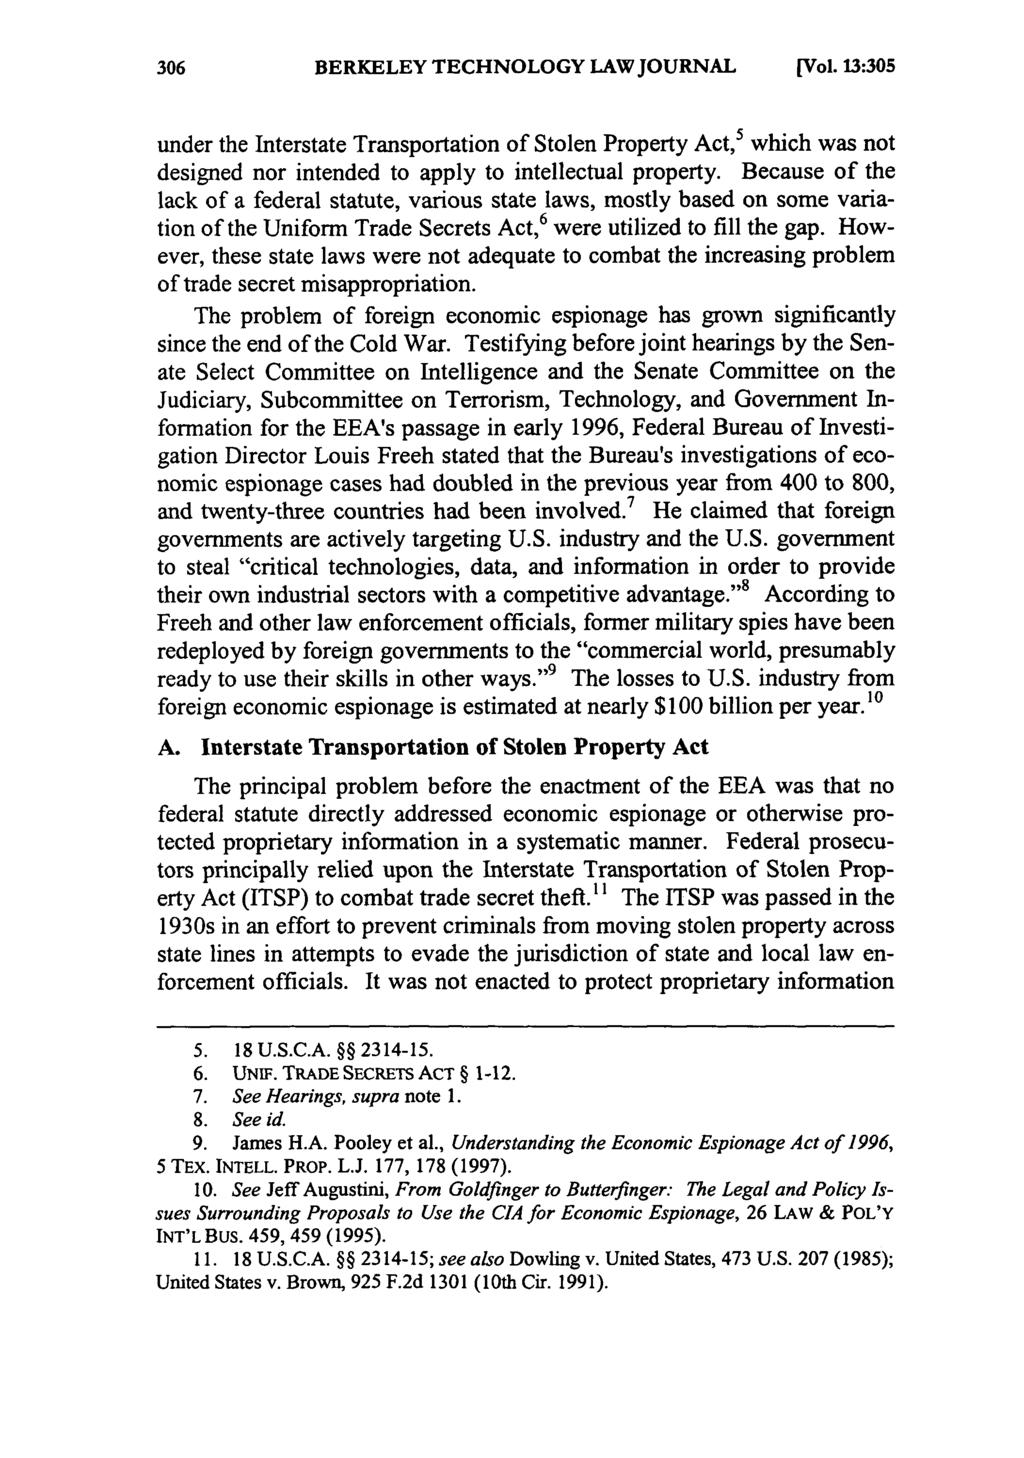 BERKELEY TECHNOLOGY LAW JOURNAL [Vol. 13:305 under the Interstate Transportation of Stolen Property Act, 5 which was not designed nor intended to apply to intellectual property.